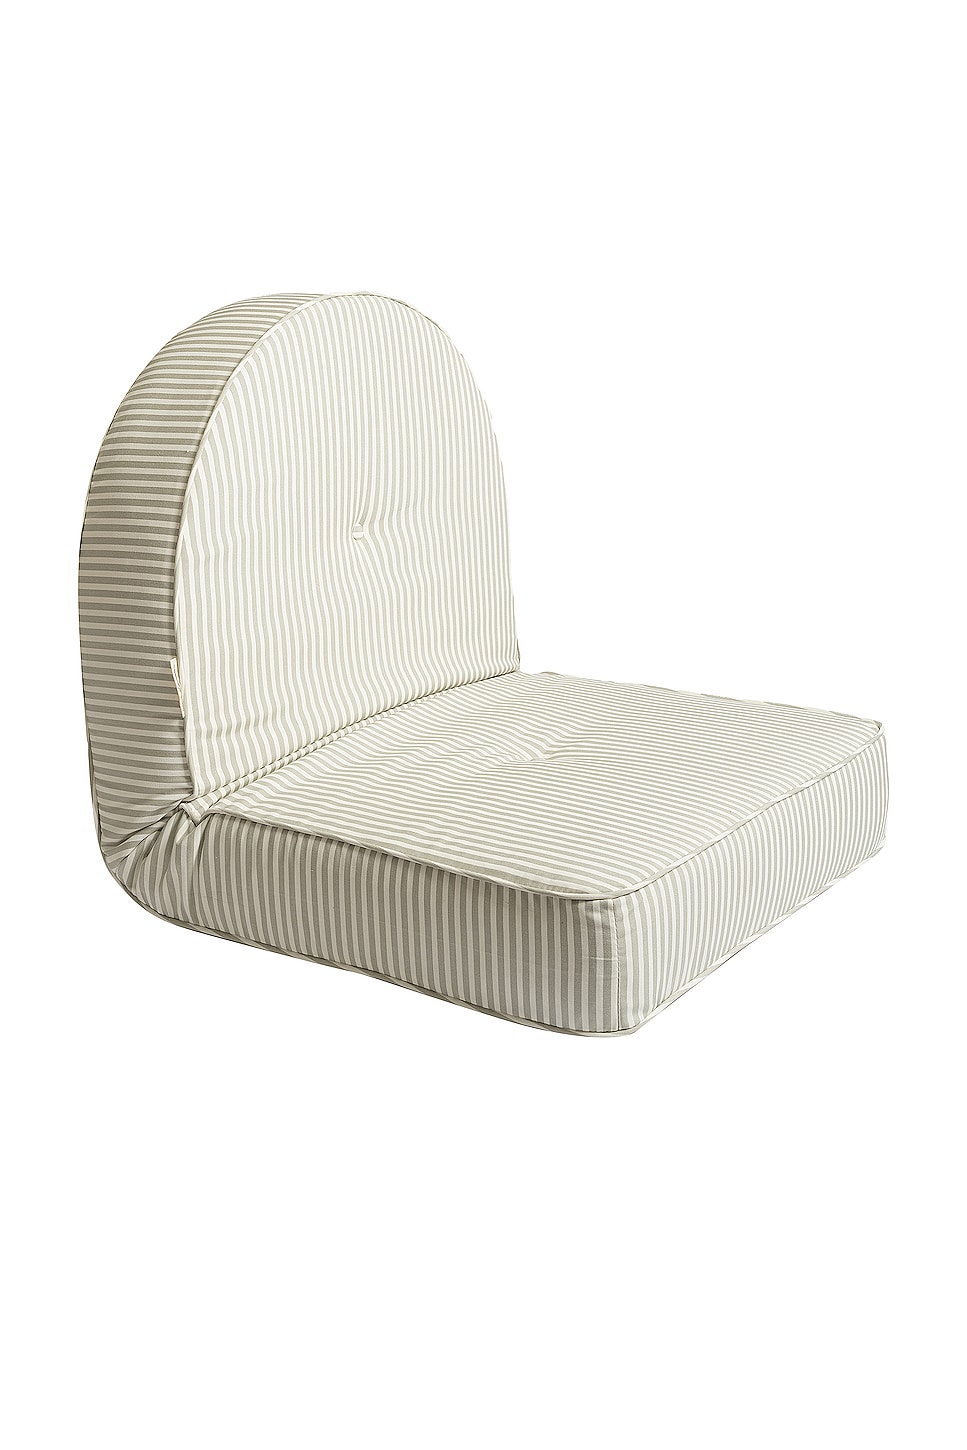 Image 1 of business & pleasure co. Reclining Pillow Lounger in Laurens Sage Stripe